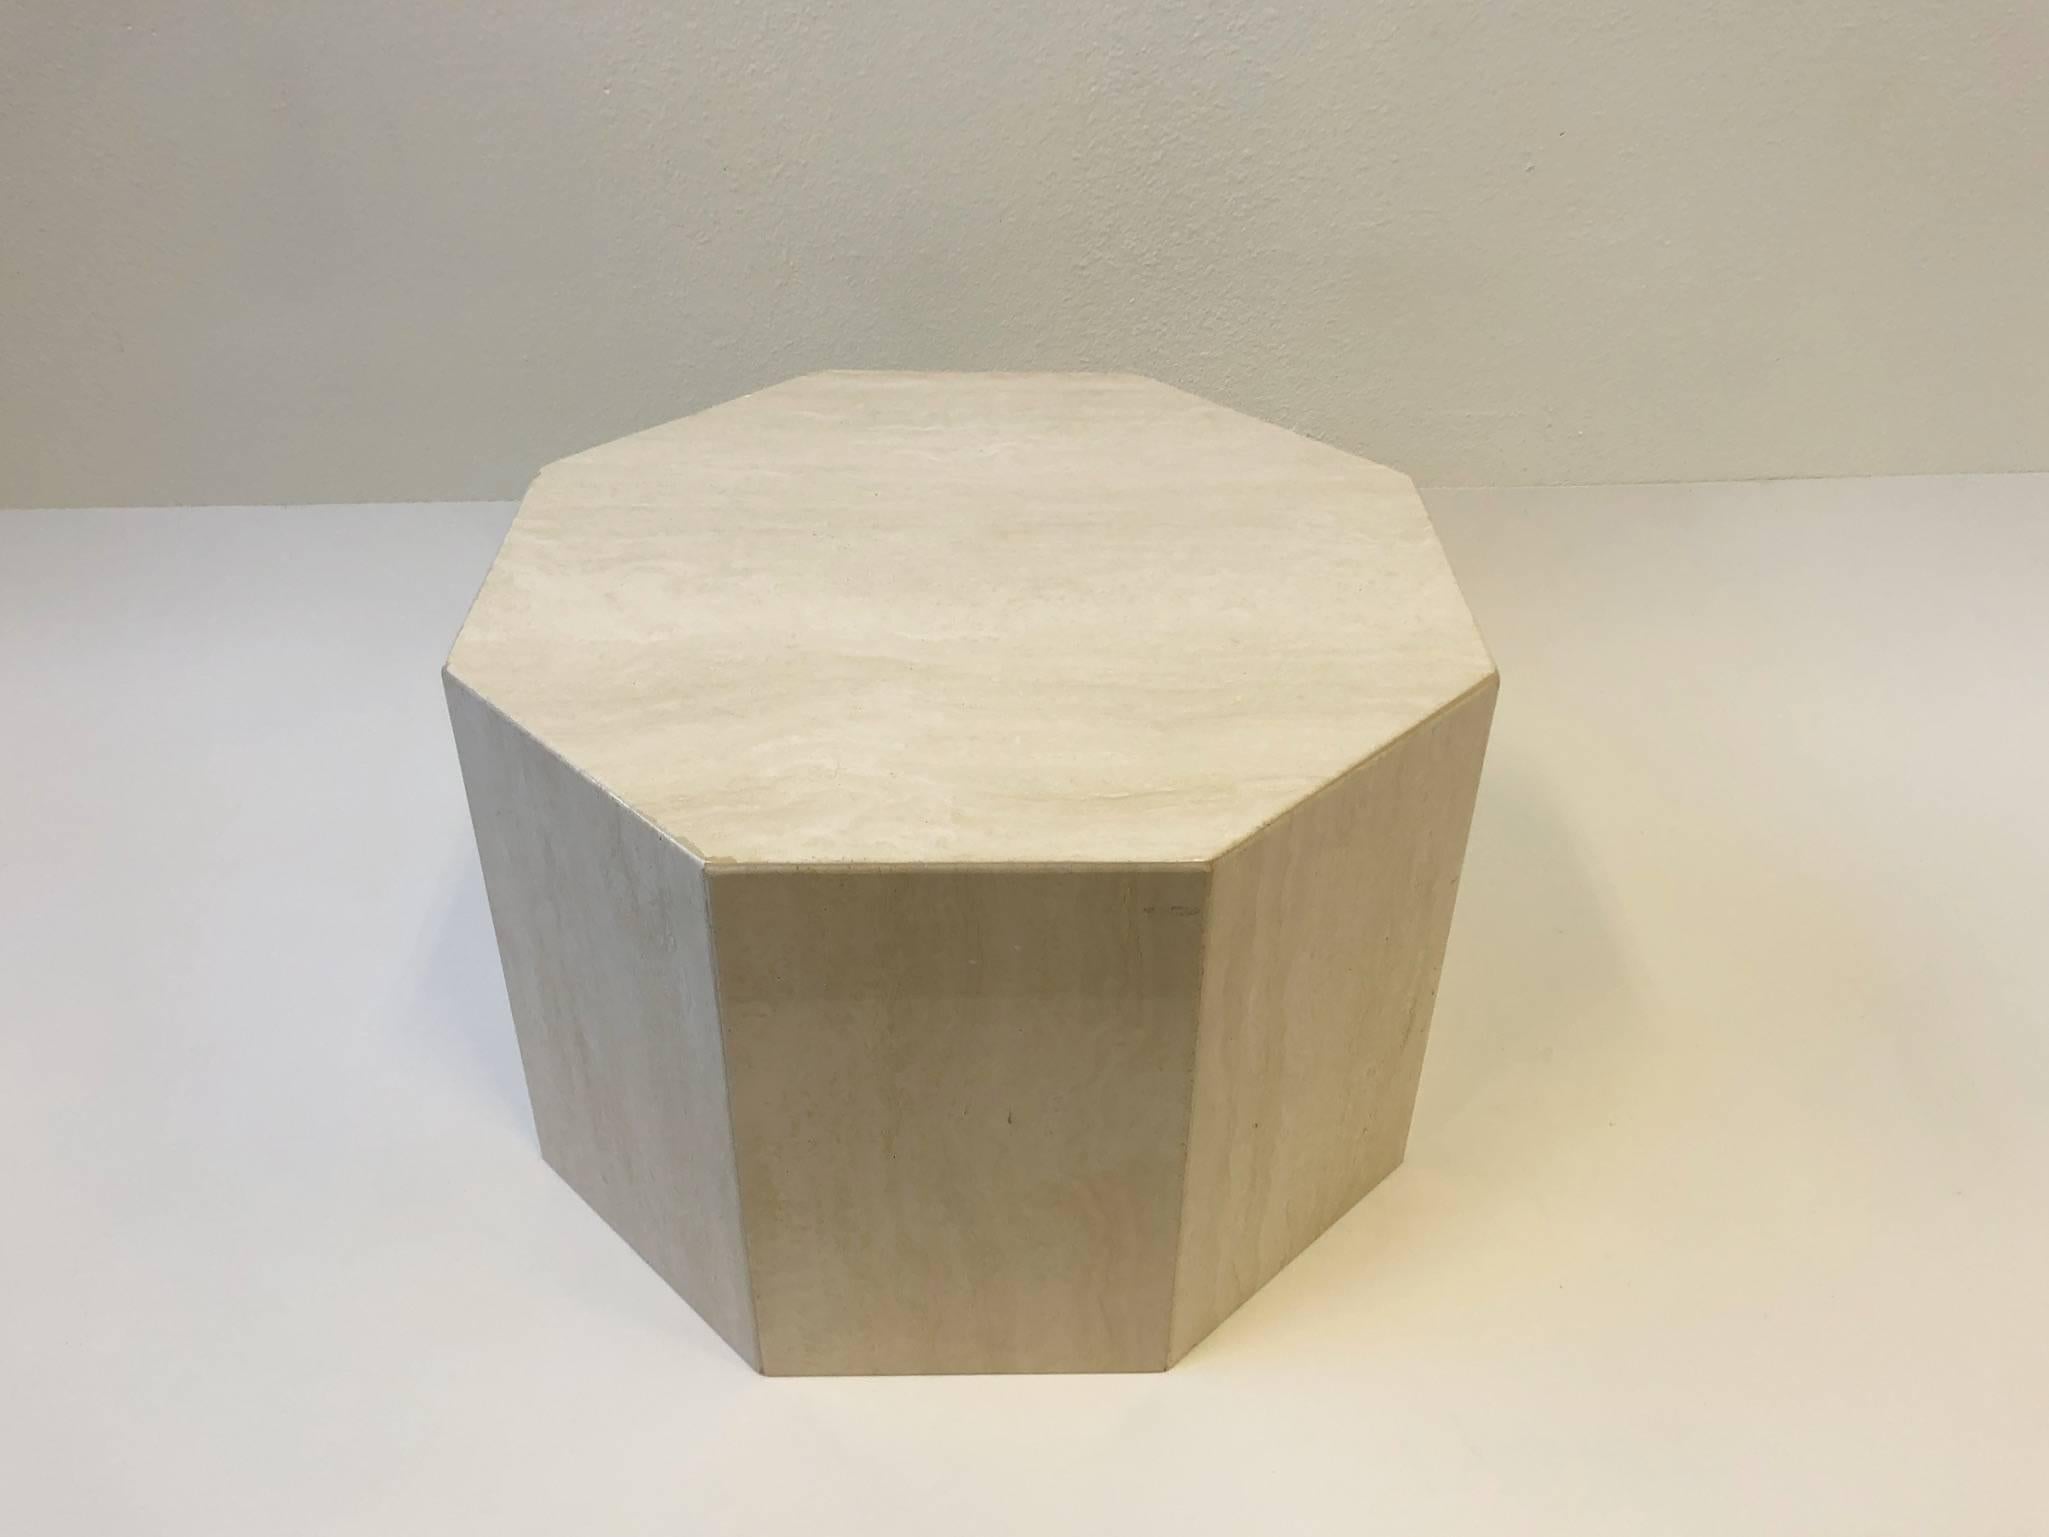 A beautiful octagonal shape polish Italian travertine cocktail table from the 1970s.
Newly professionally polished. You could place a glass top to make it bigger. It can take up to 60” in diameter round glass top. Price is without glass.